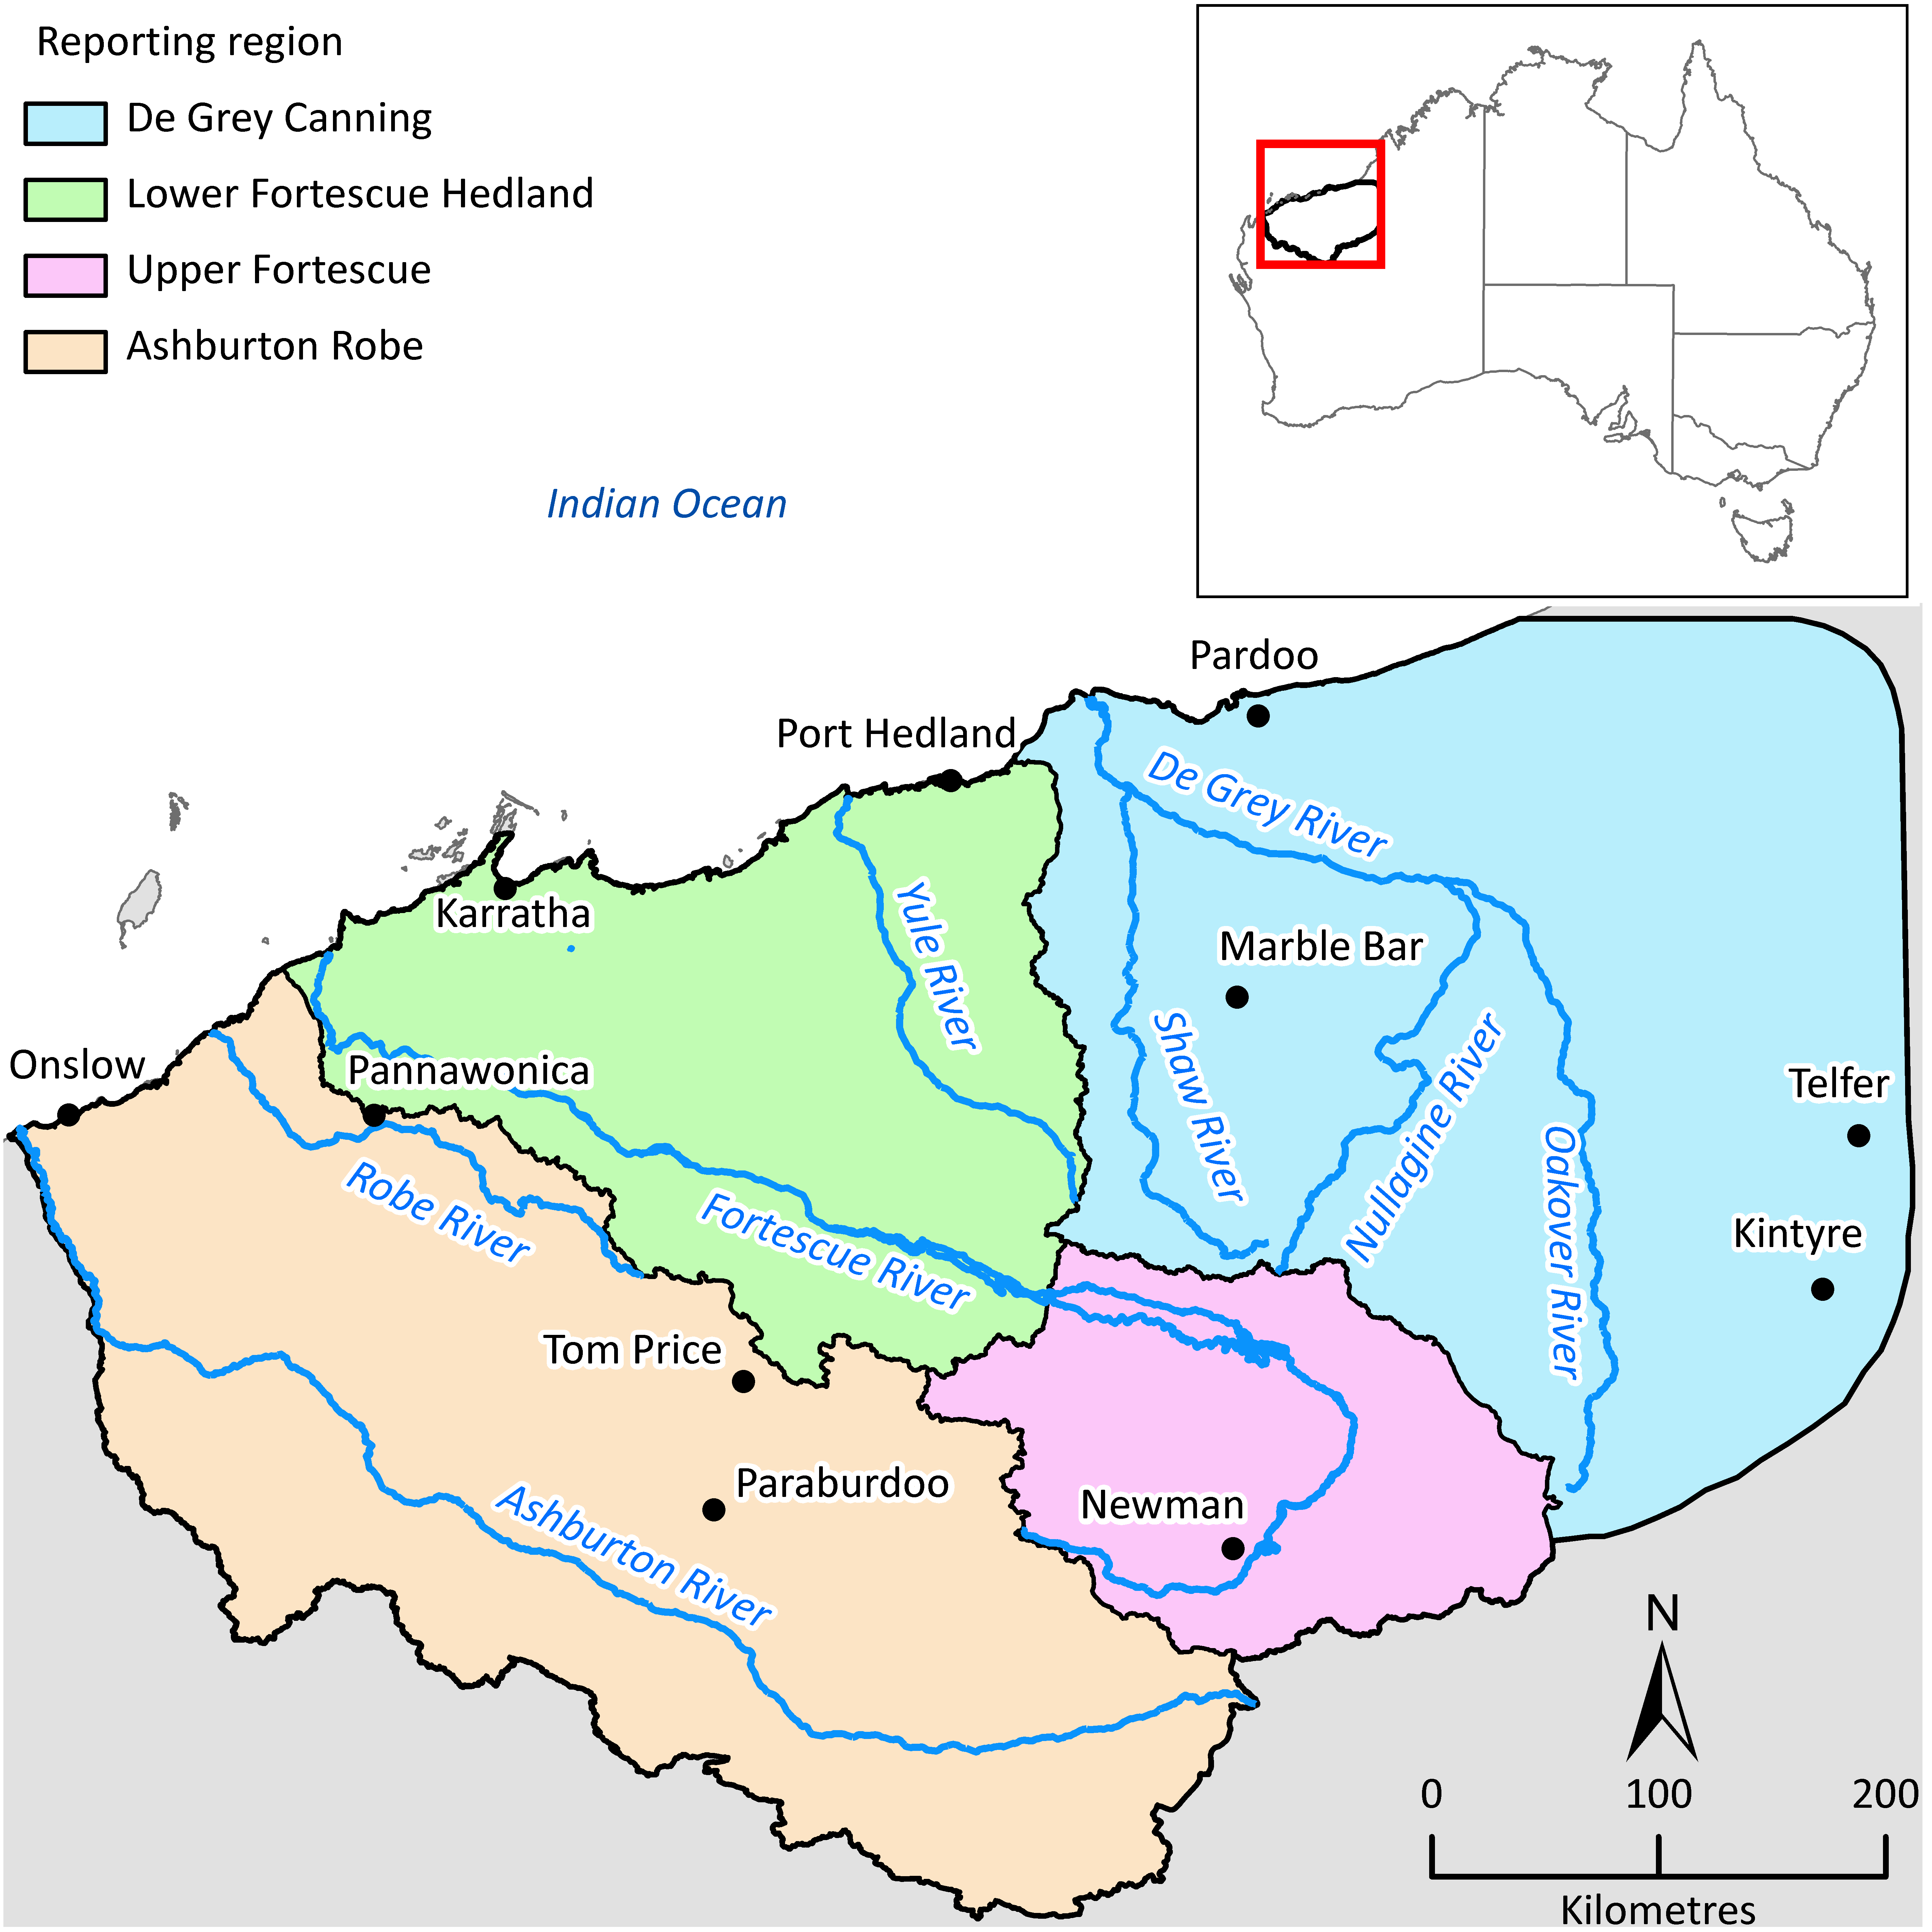 A map showing a highlighted area in north western Australia, which is divided into four sections called Ashburton Robe, De Grey Canning, Lower Fortescue and Upper Fortescue. The area's major rivers are indicated on the map.